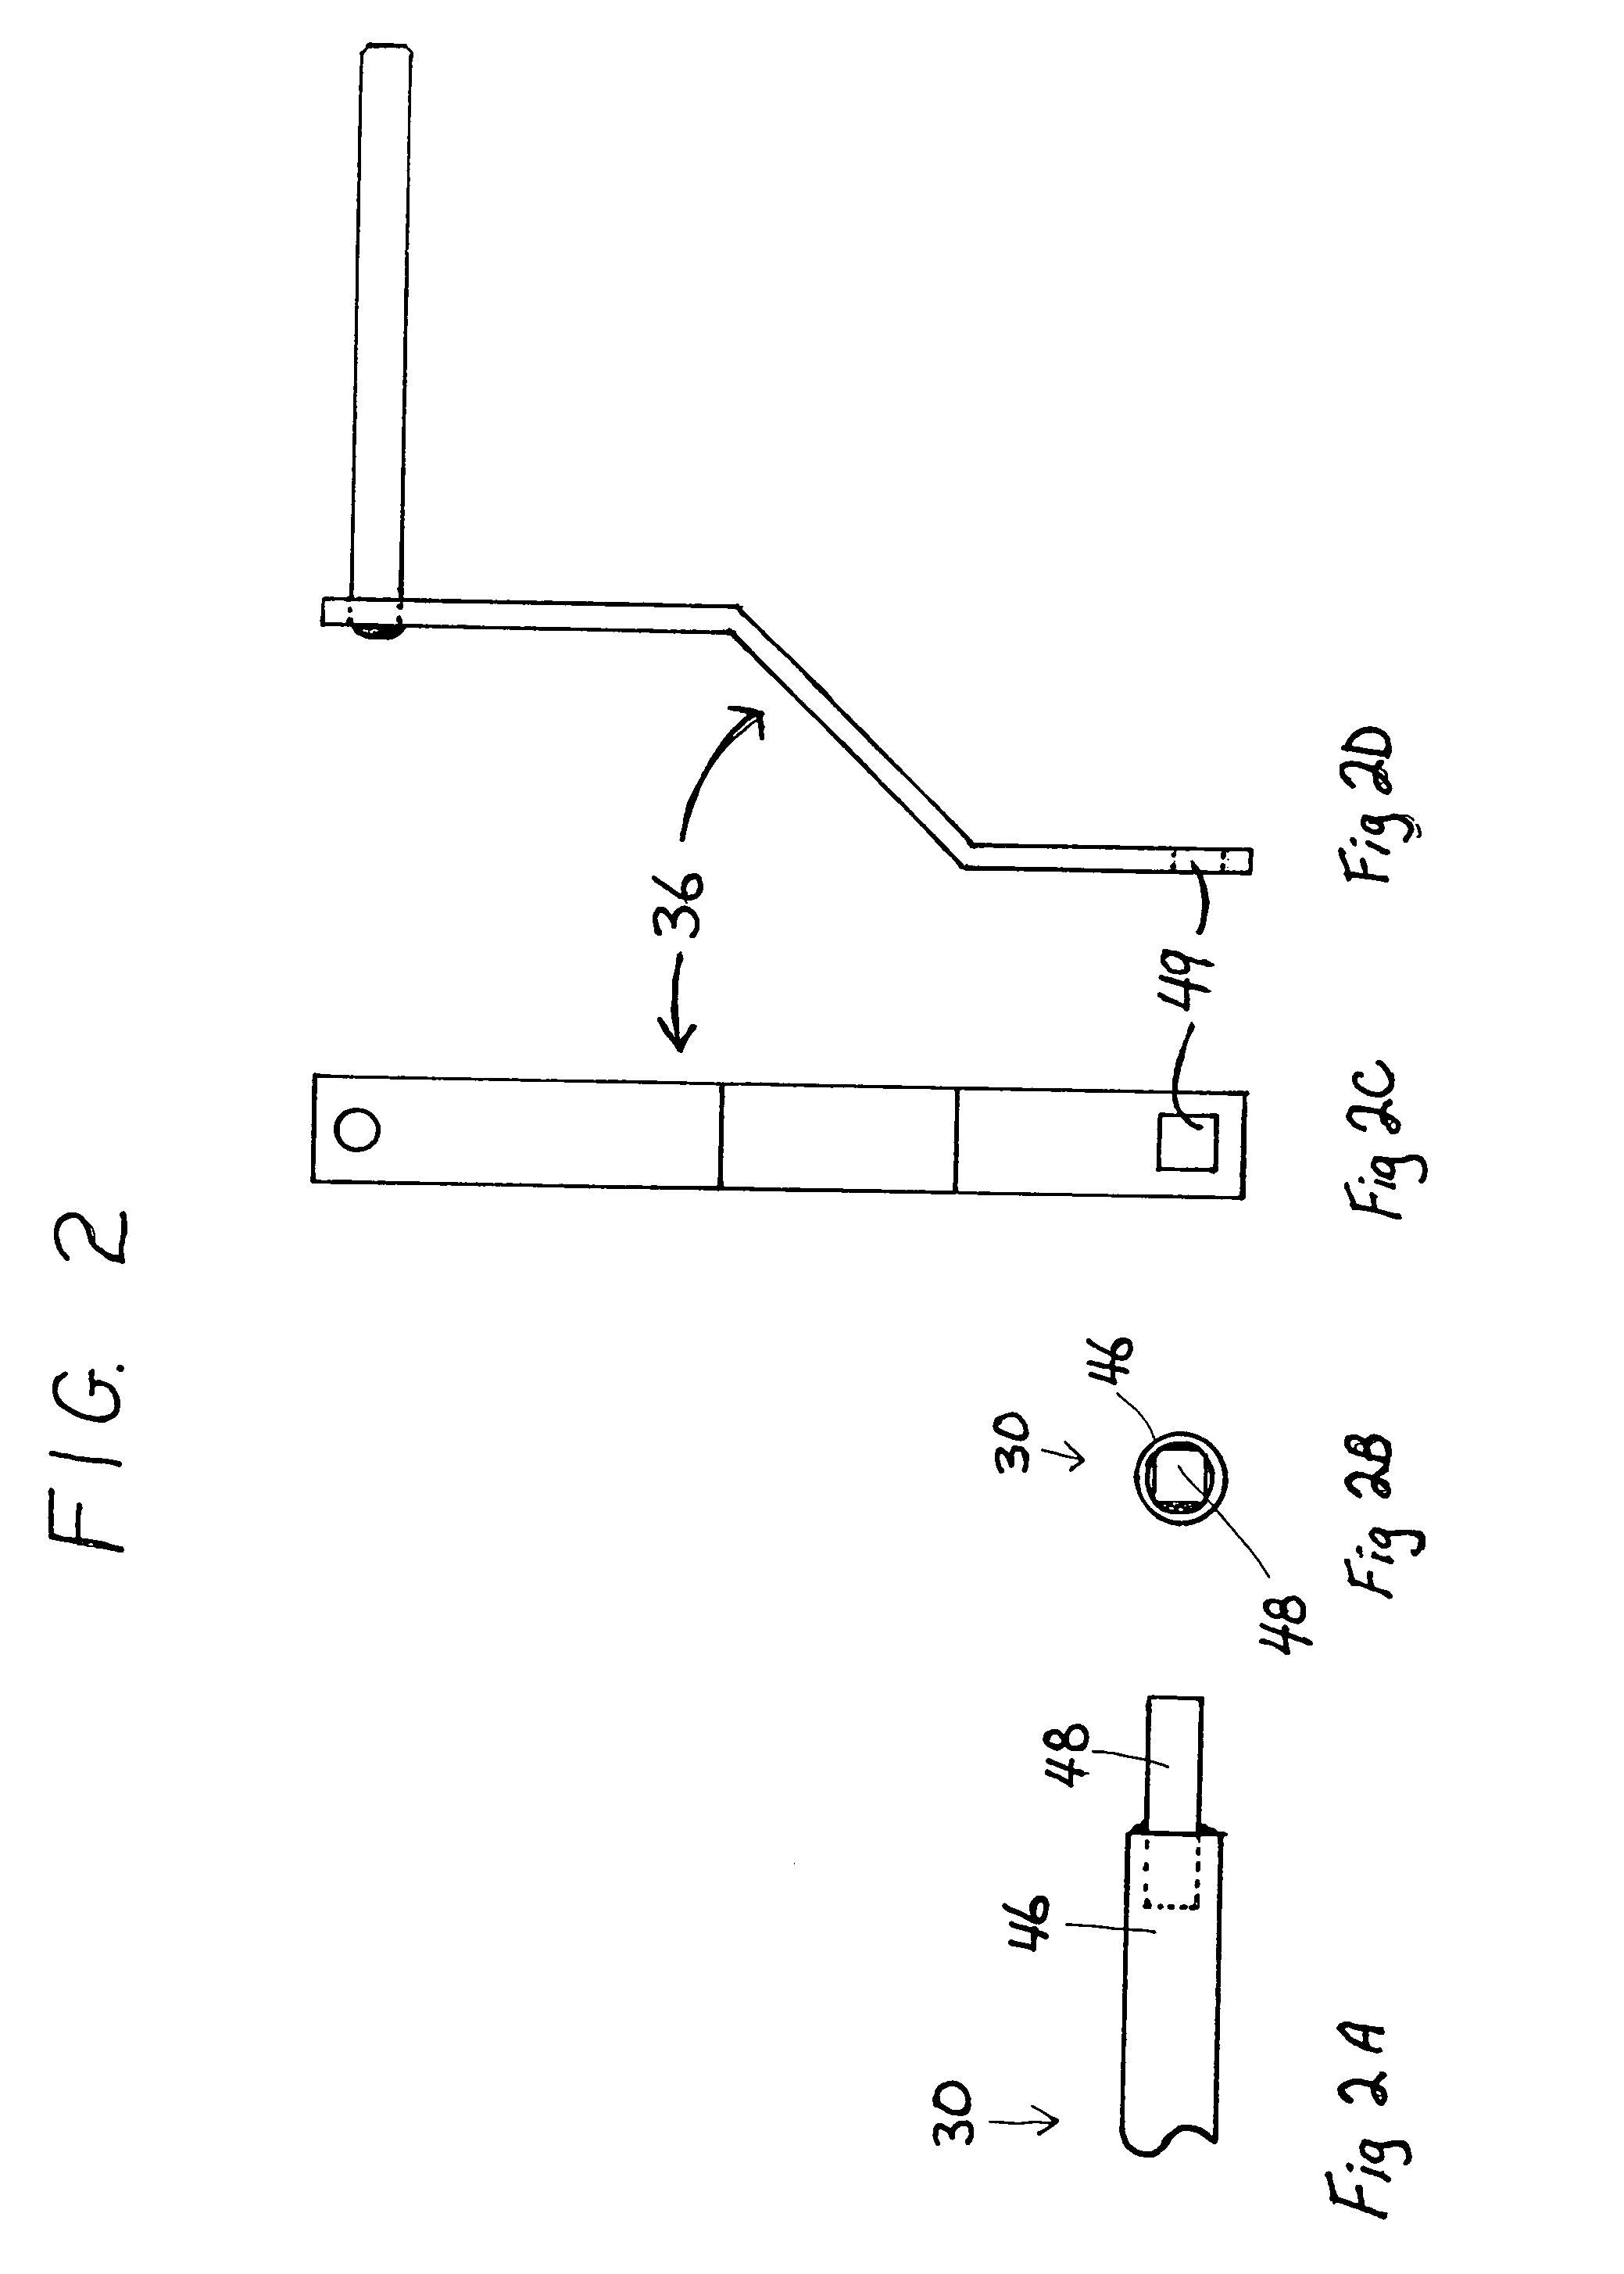 Device for mounting on a vehicle for hoisting and transporting a big-game carcass